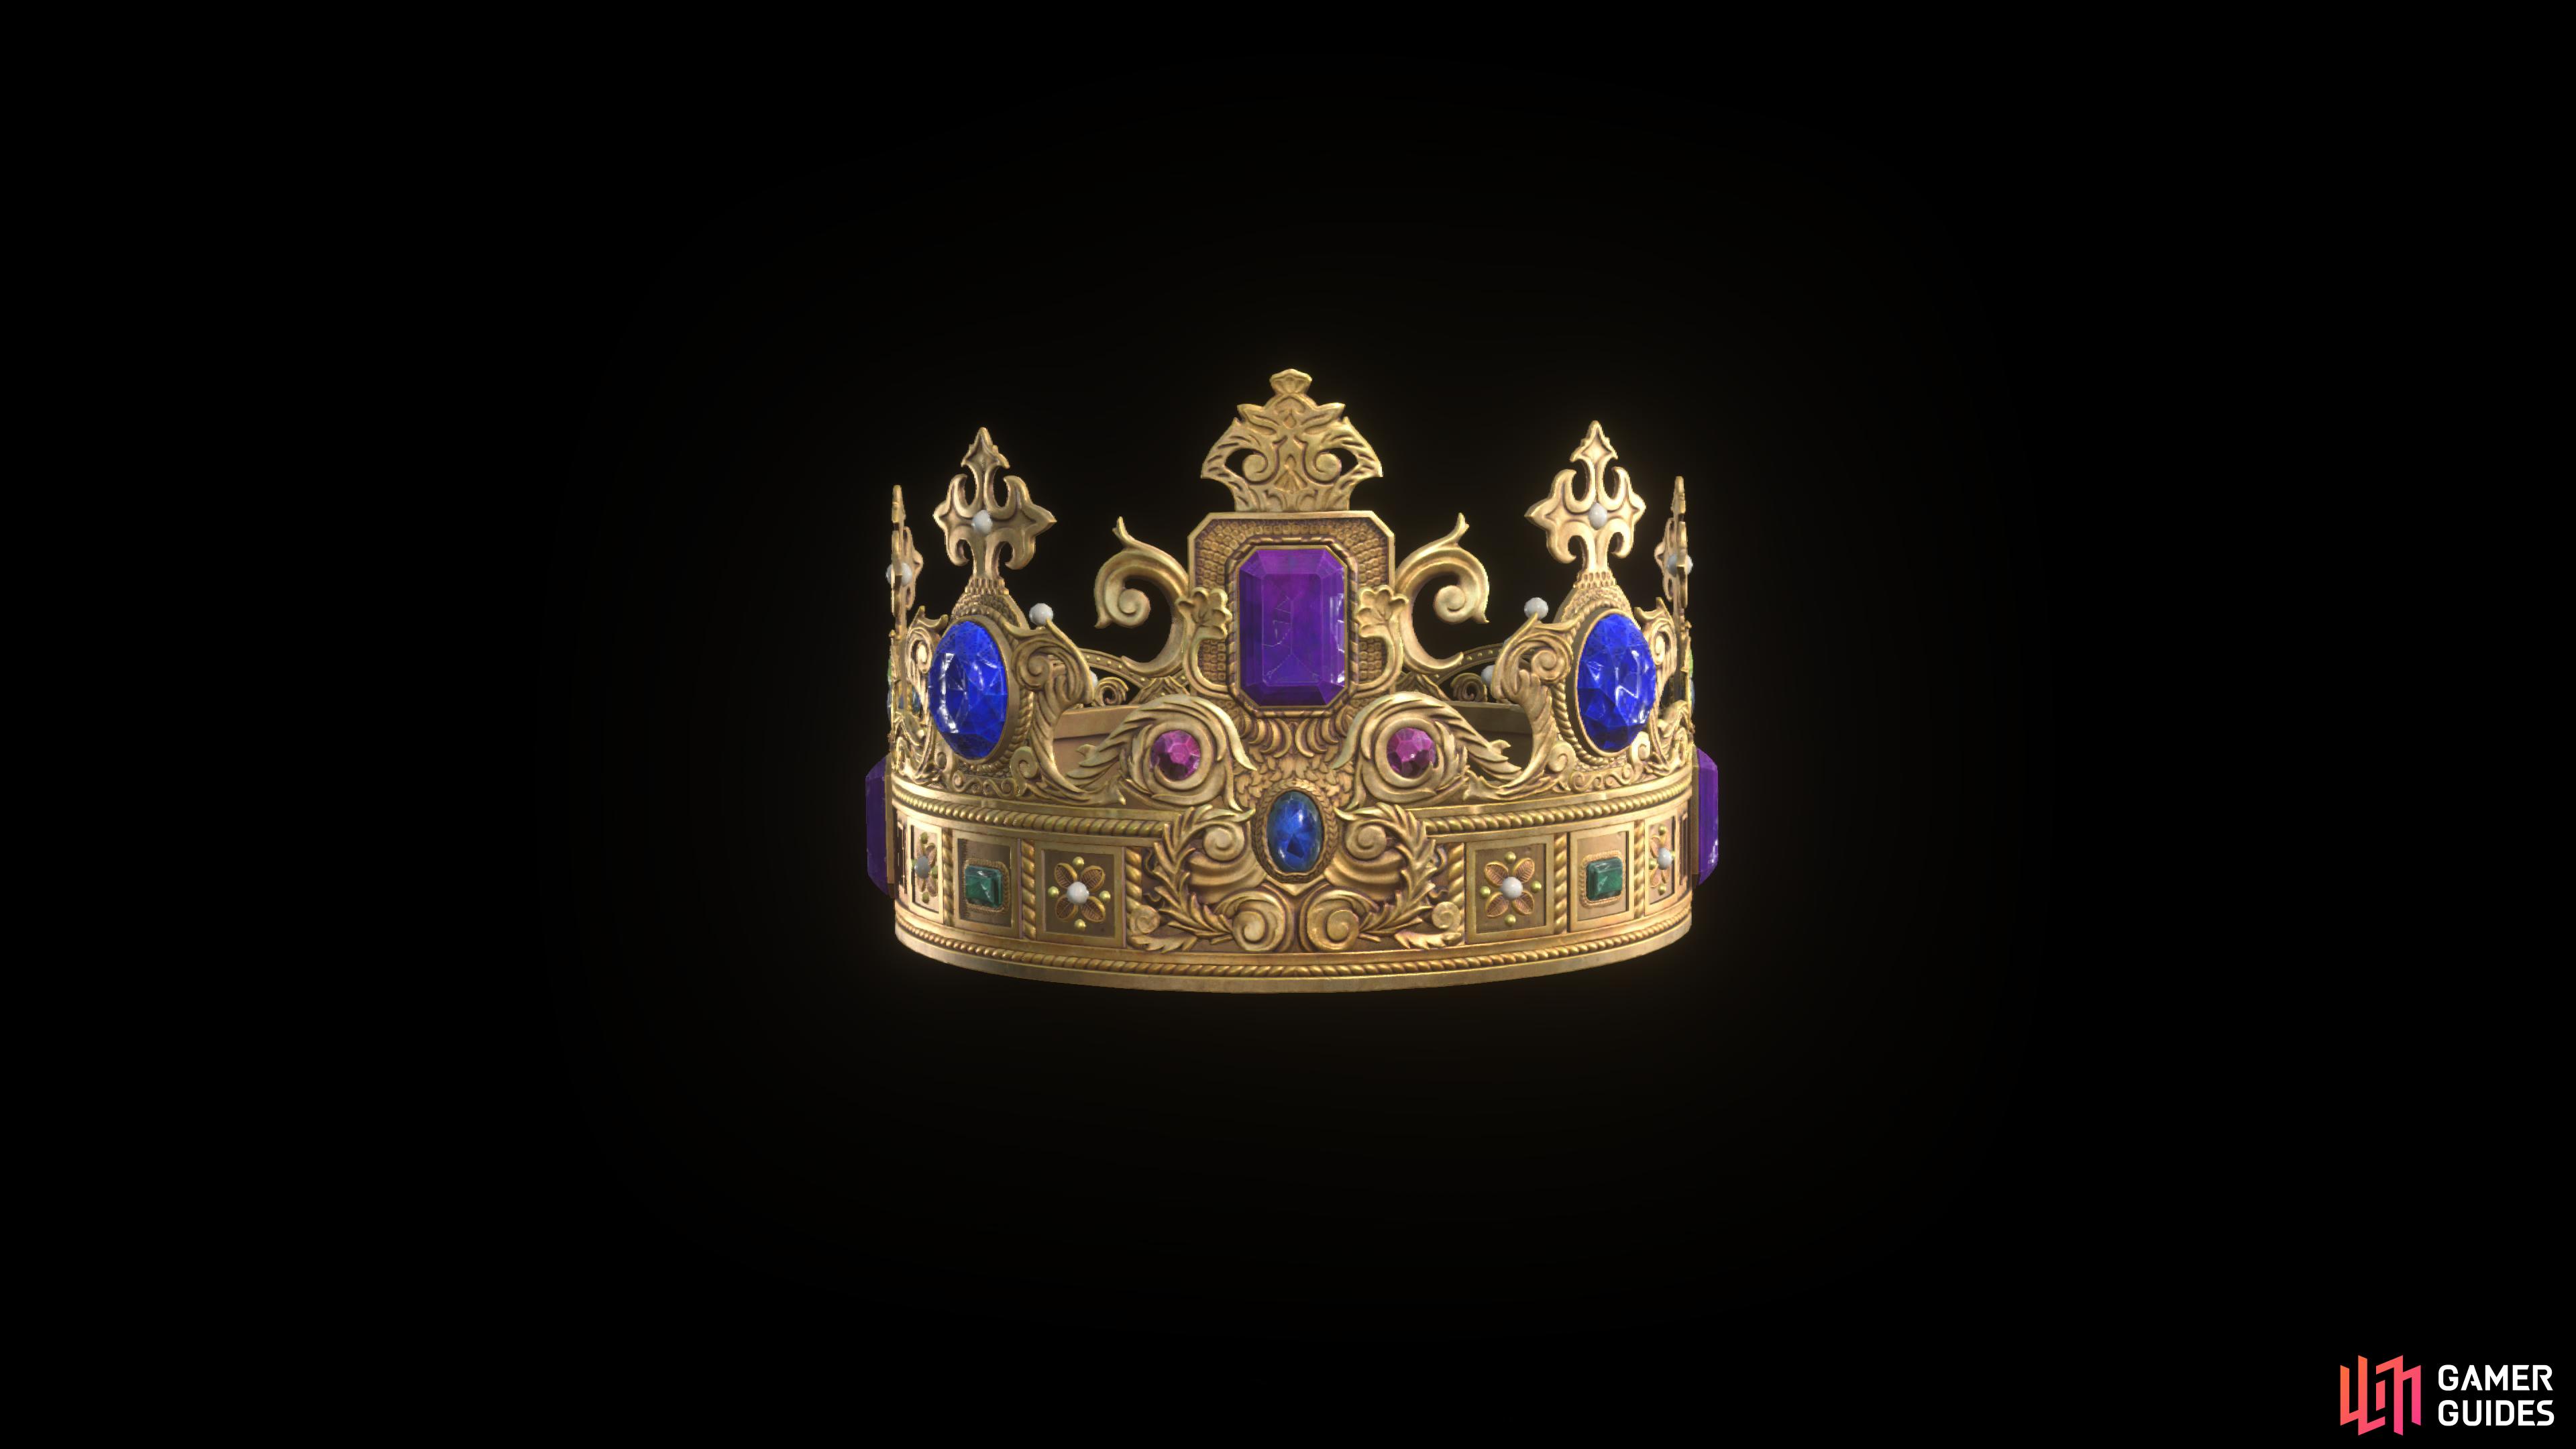 If you combine the Elegant Crown with a specific set of gems, you can obtain the Astute Appraiser trophy/achievement when you sell it.